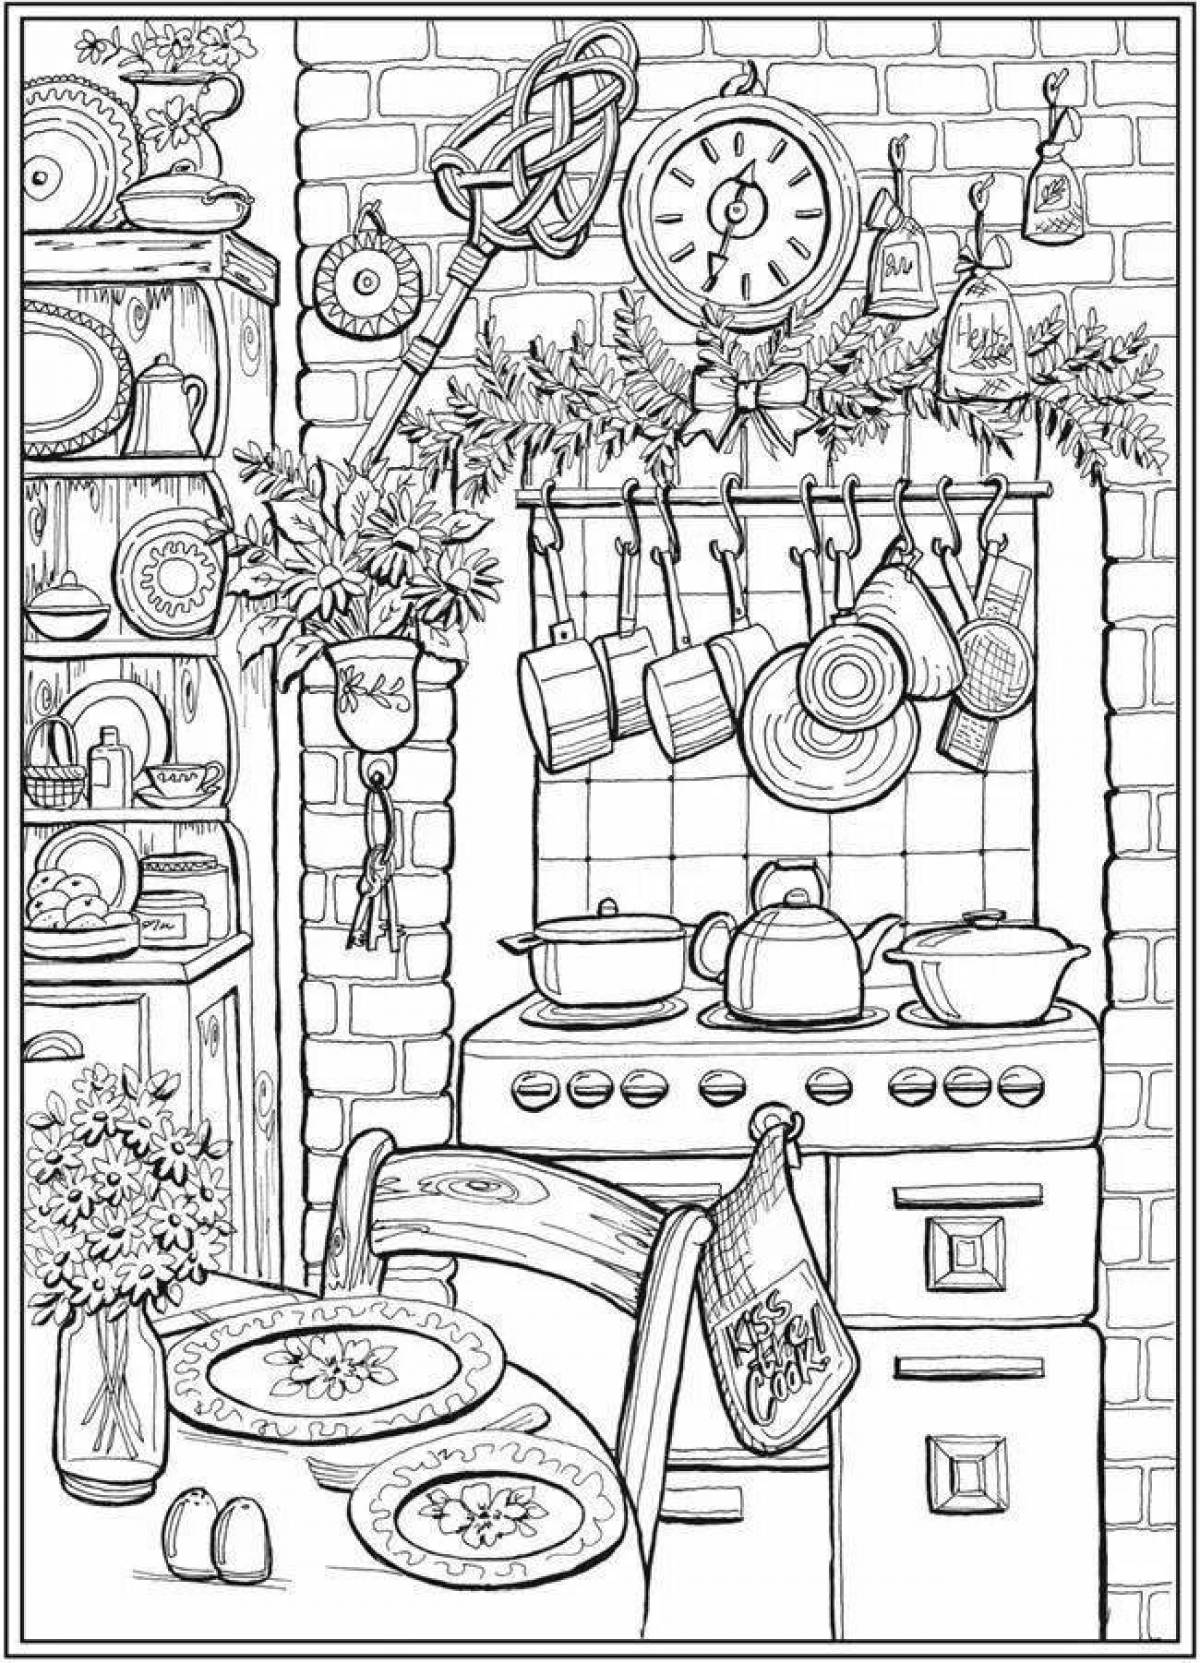 Creative haven coloring page - playful